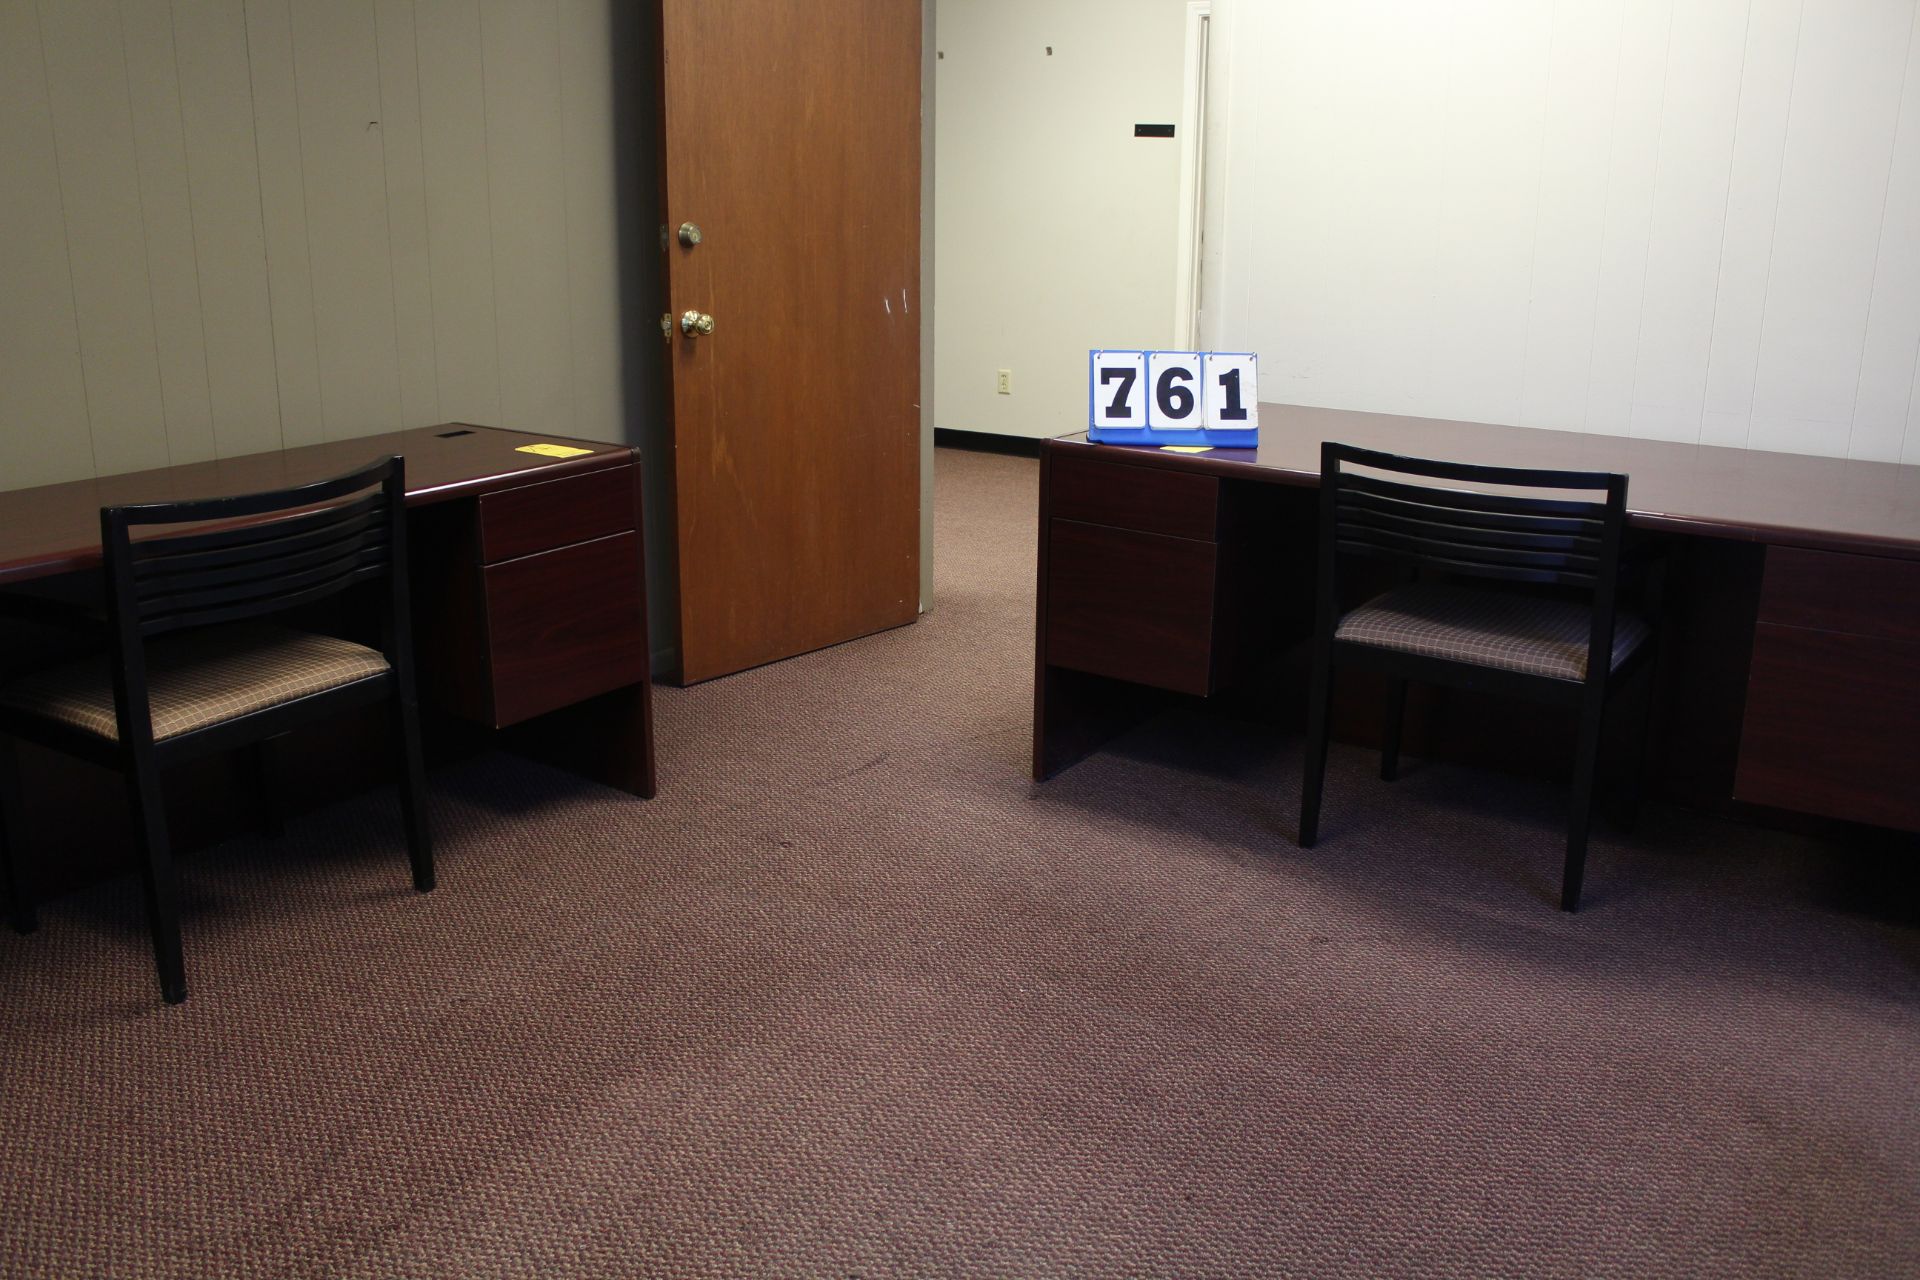 CONT OF OFFICE: FURNITURE AS SHOWN